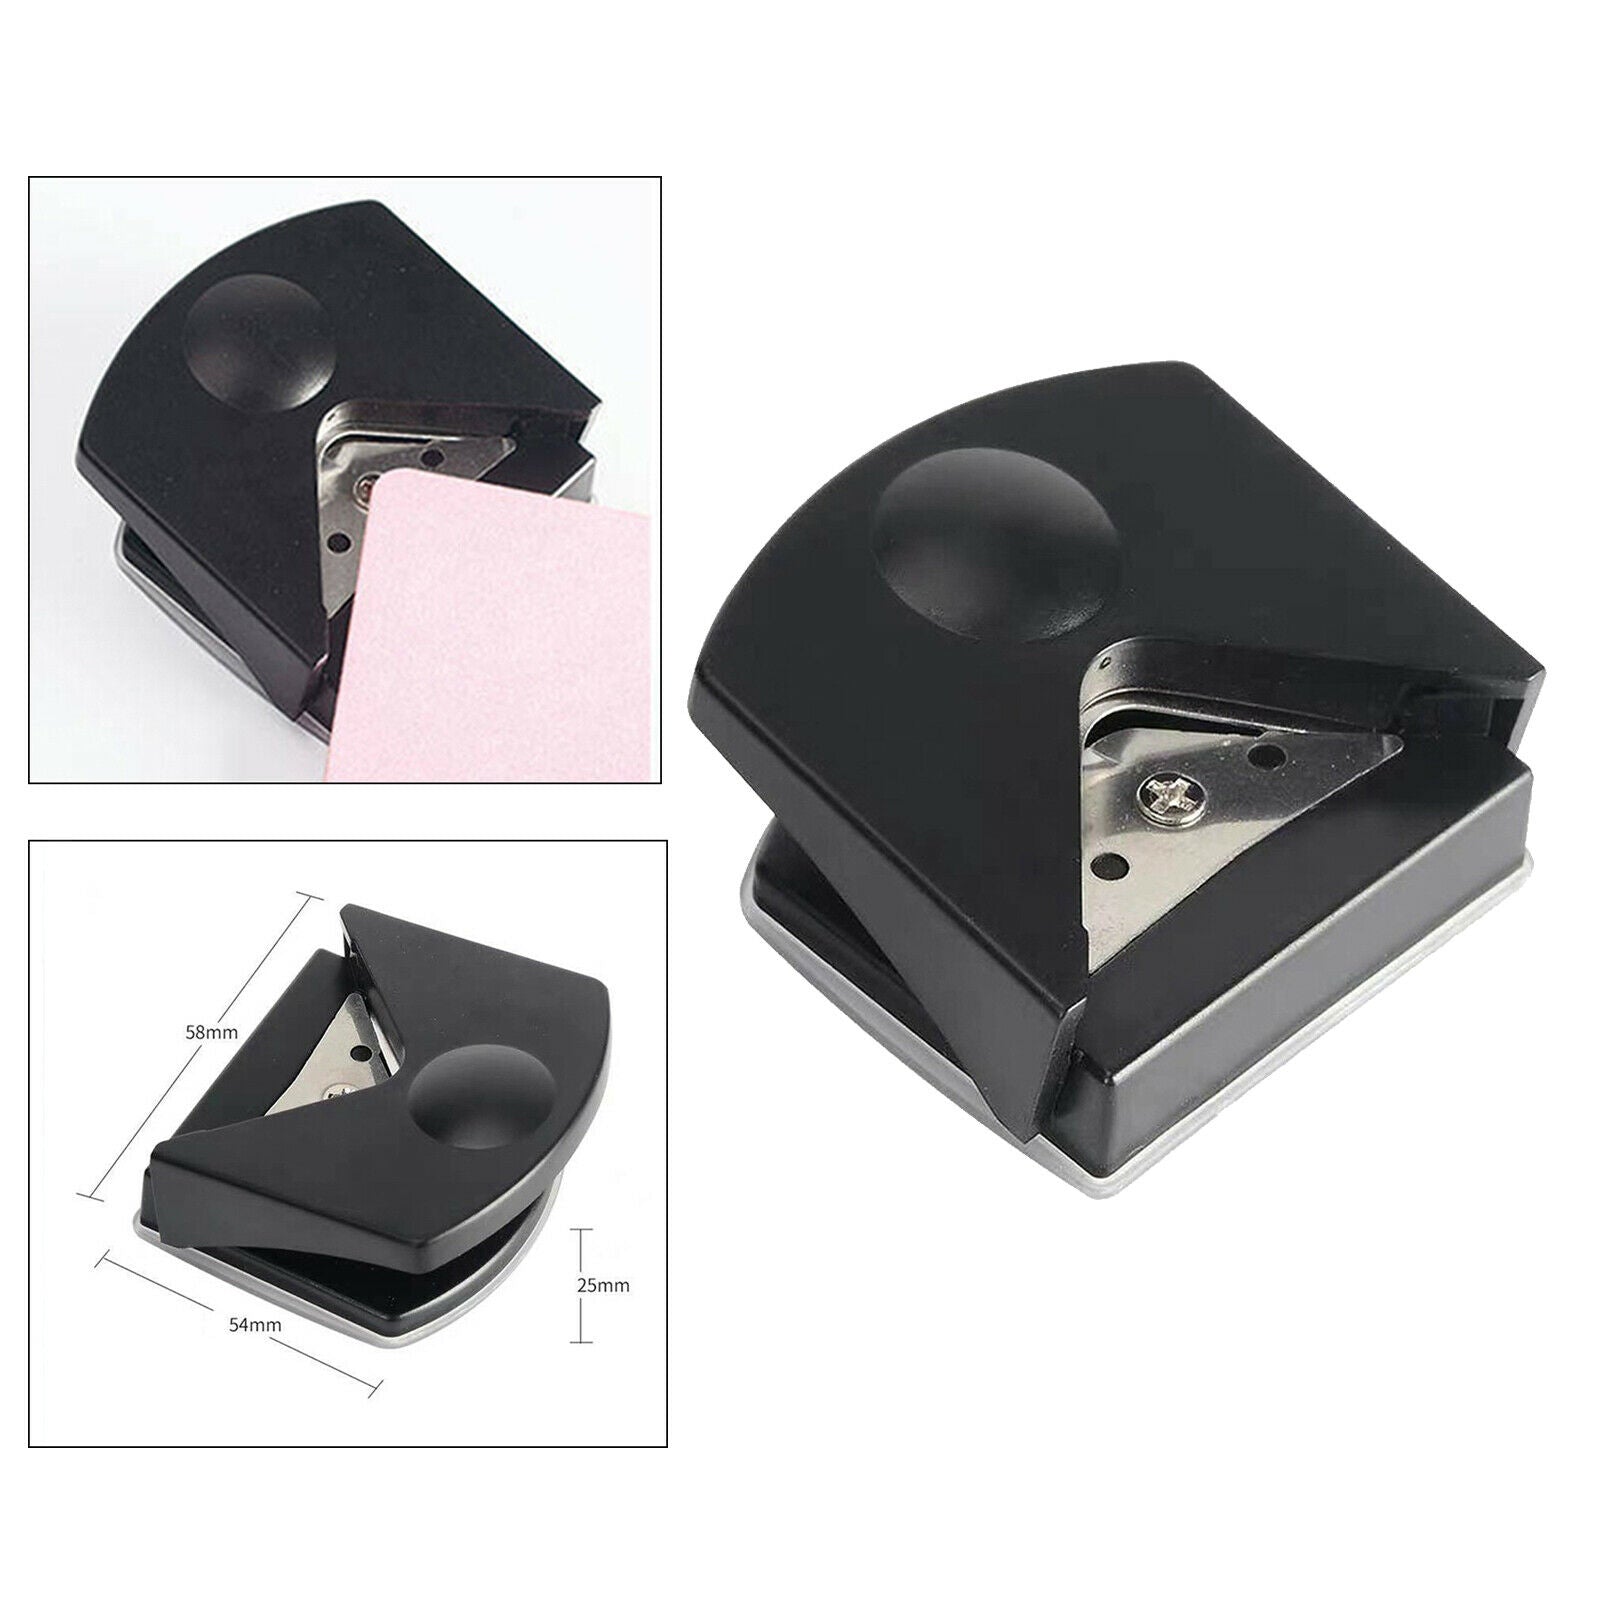 Corner Rounder Lightweight Cutter Tool for Card Photo Invitations Black